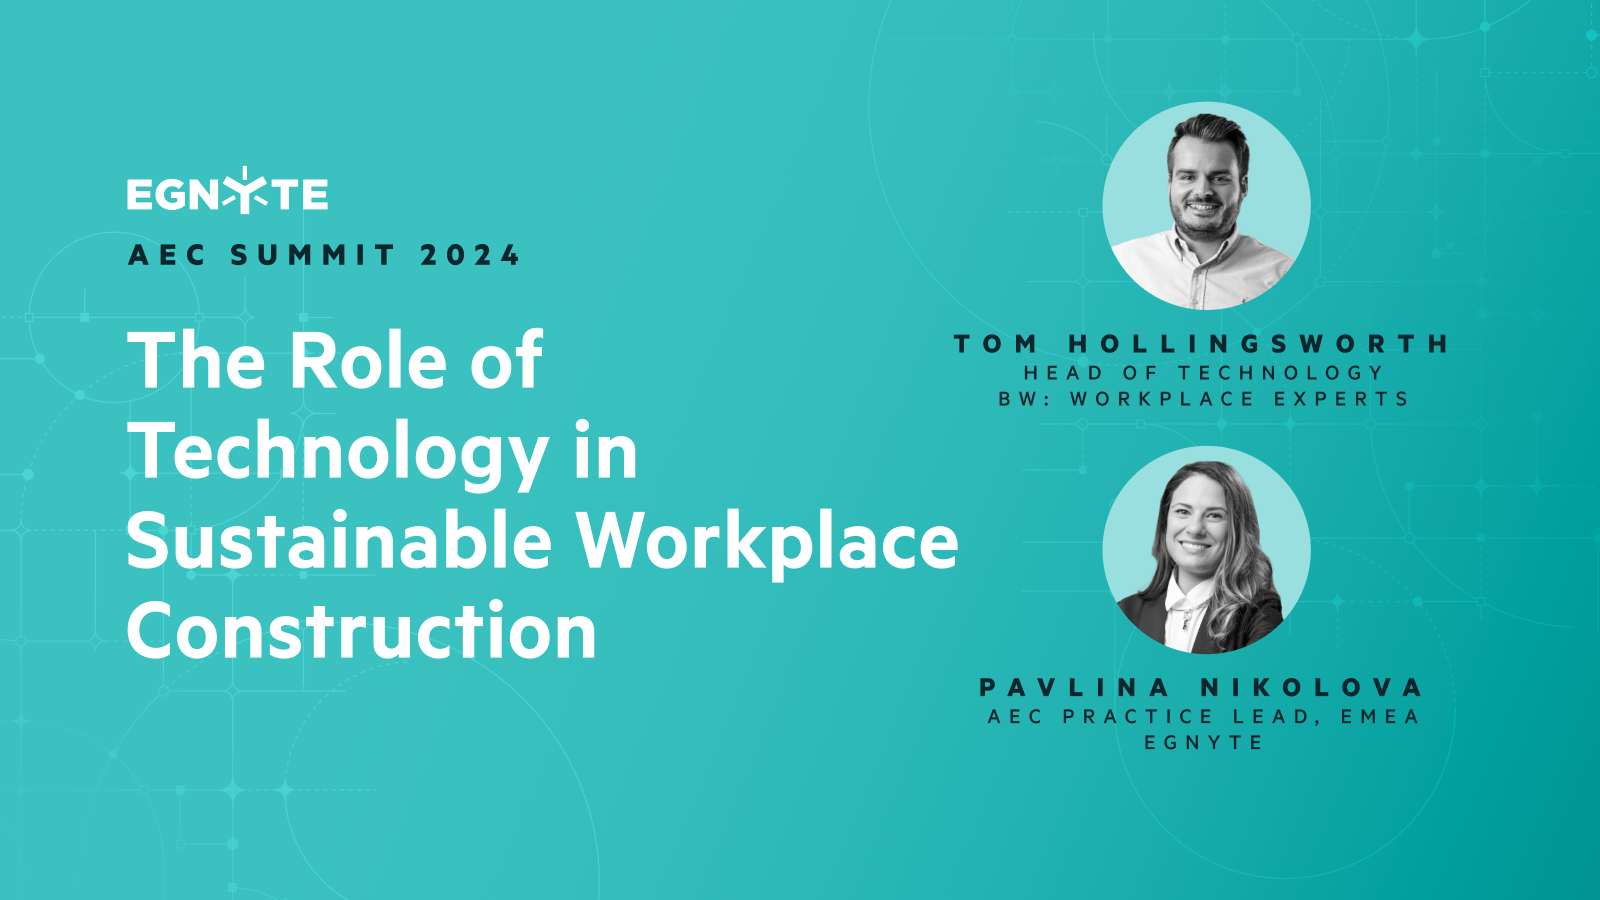 The Role of Technology in Sustainable Workplace Construction